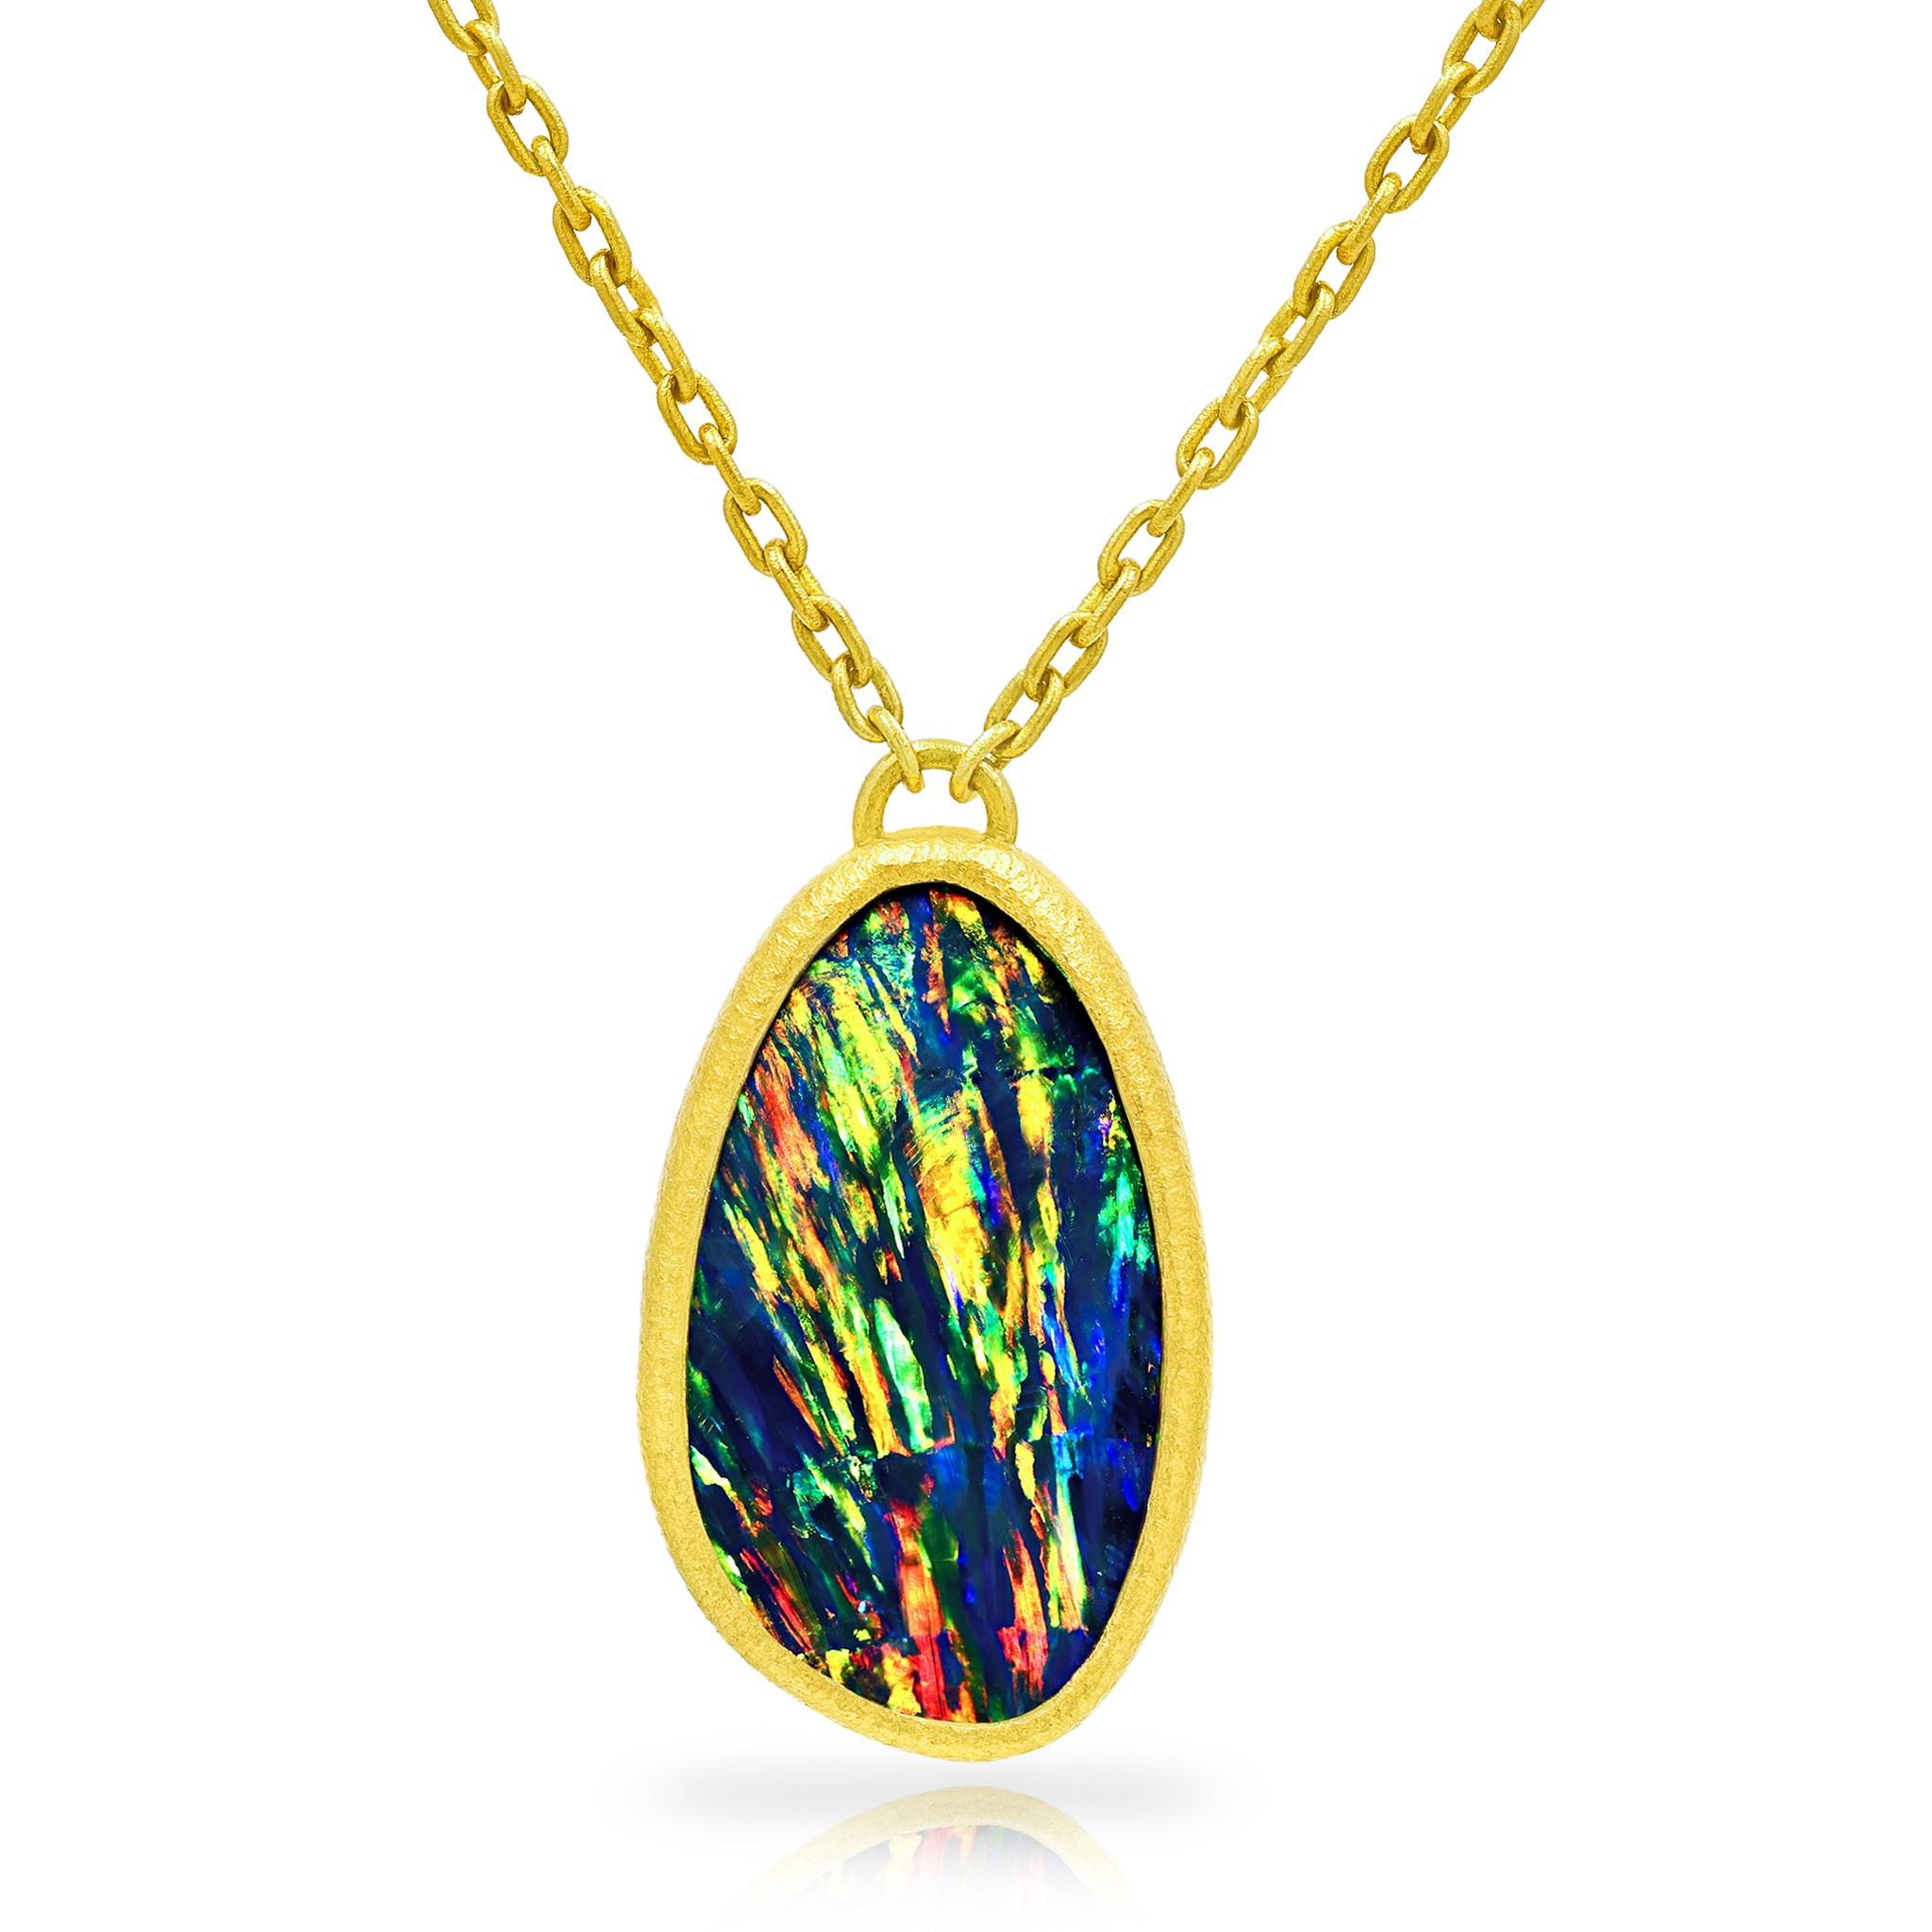 You have never seen an opal like this! Finest quality, rare gem black opal doublet one-of-a-kind drop necklace by acclaimed jewelry maker Devta Doolan hand-fabricated in the artist's signature, textured 22k yellow gold bezel setting and finished on